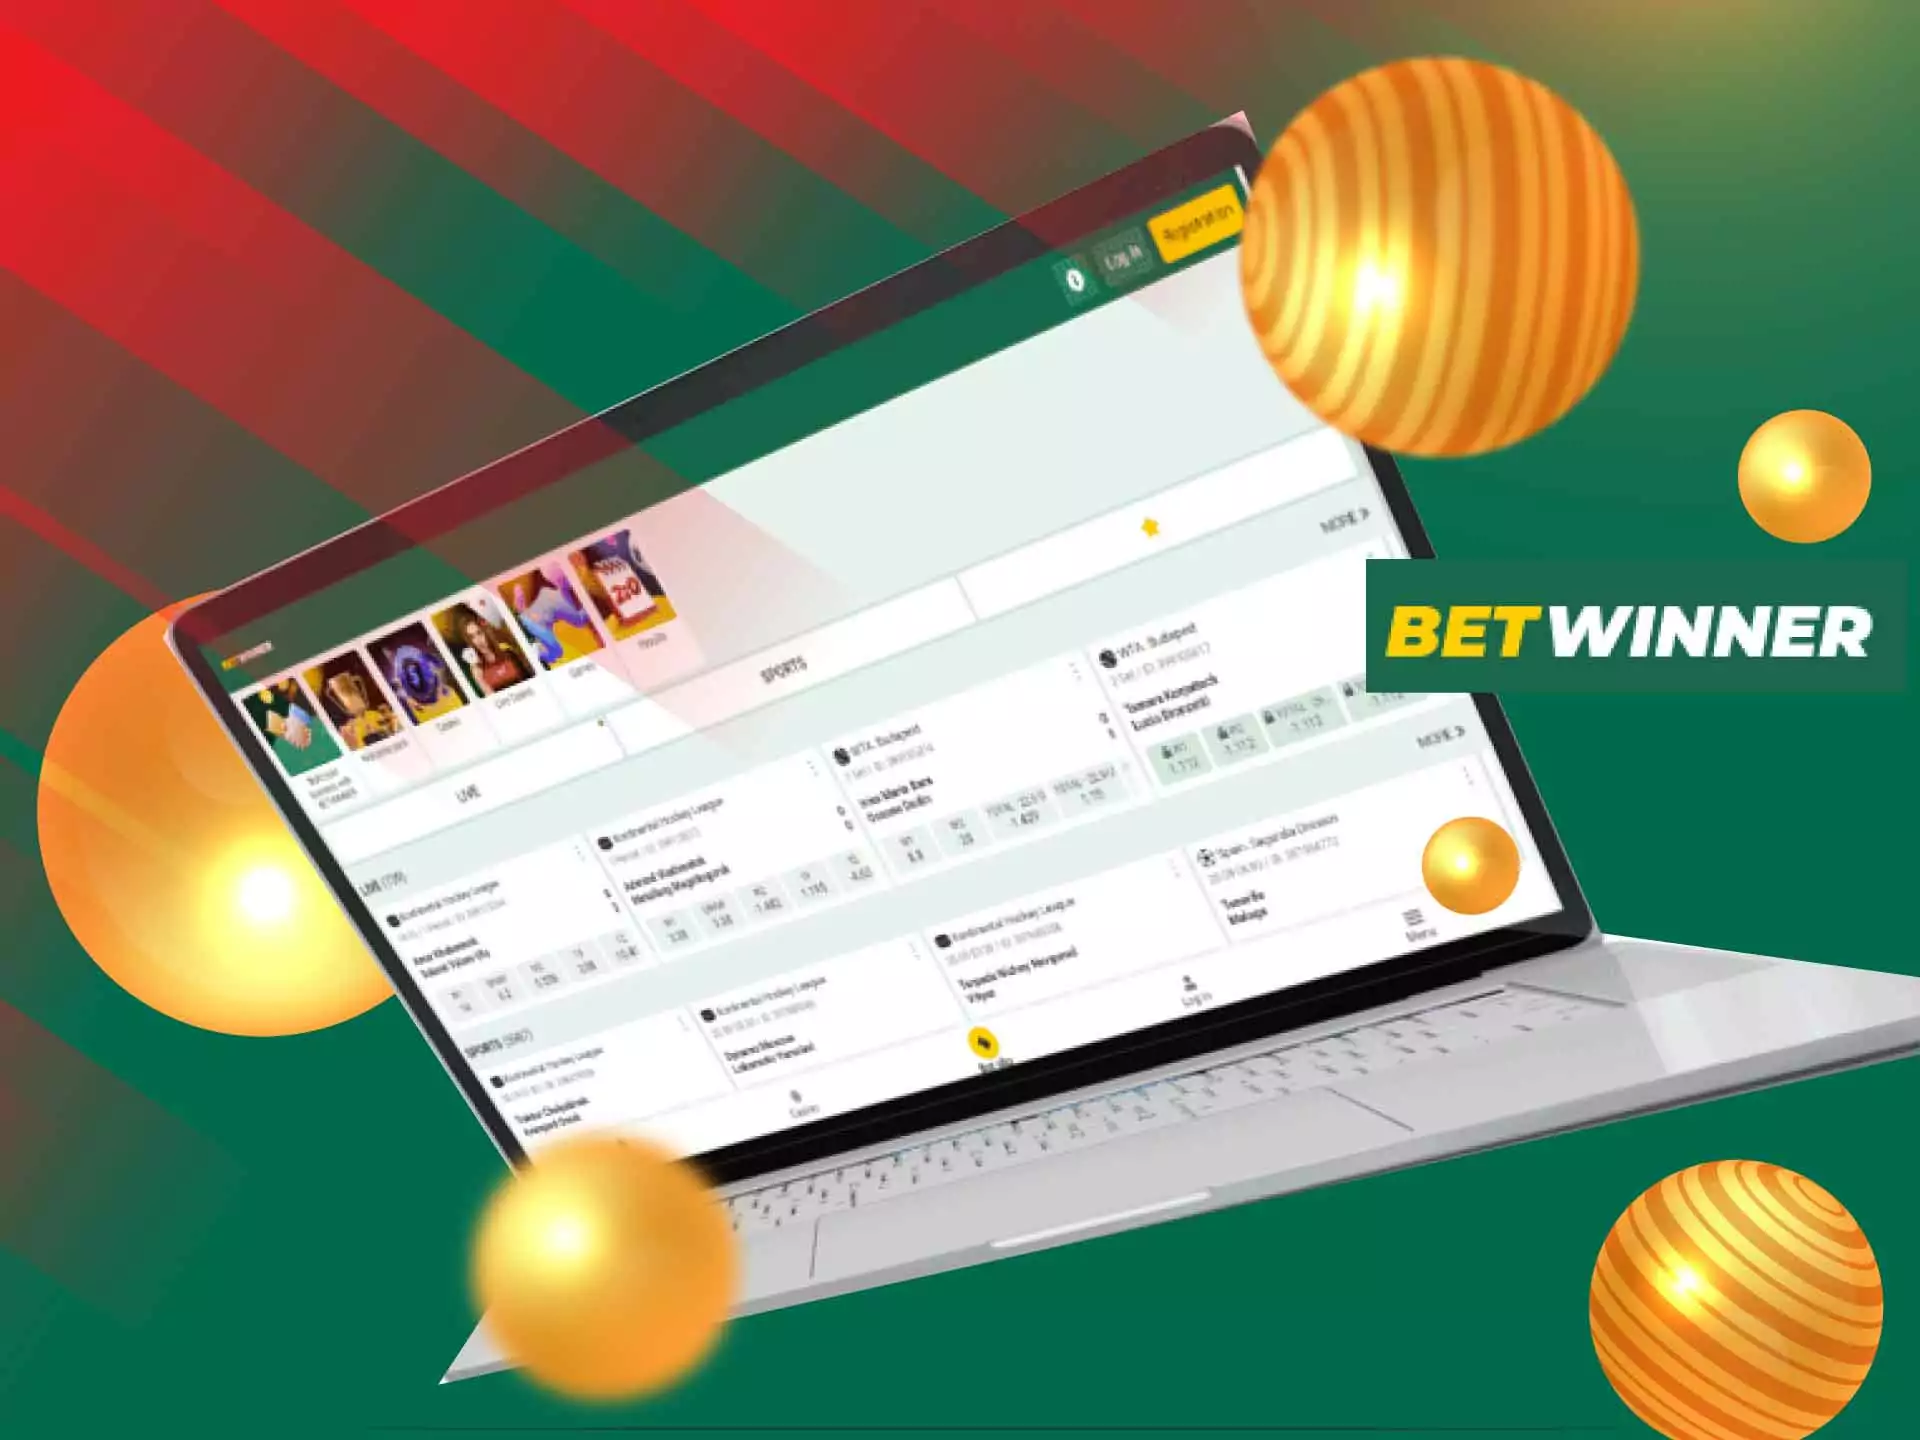 You can use the Betwinner desktop version on your laptop.